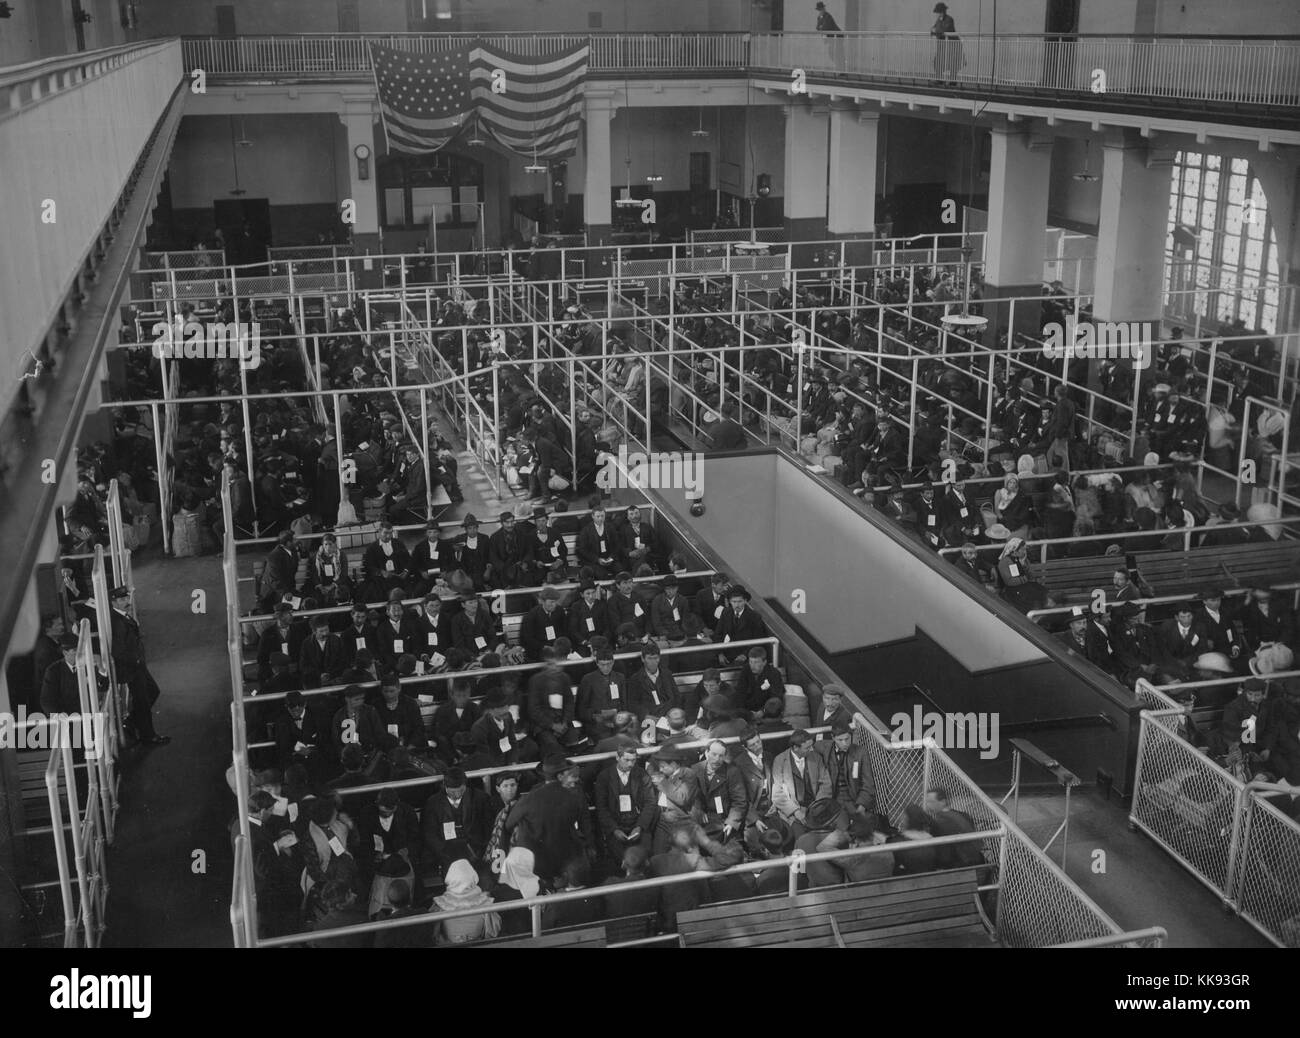 Black and white photograph showing the pens at the Ellis Island Registry Room (or Great Hall), all filled with immigrants, by Edwin Levick, Ellis Island, New York, 1907. From the New York Public Library. Stock Photo